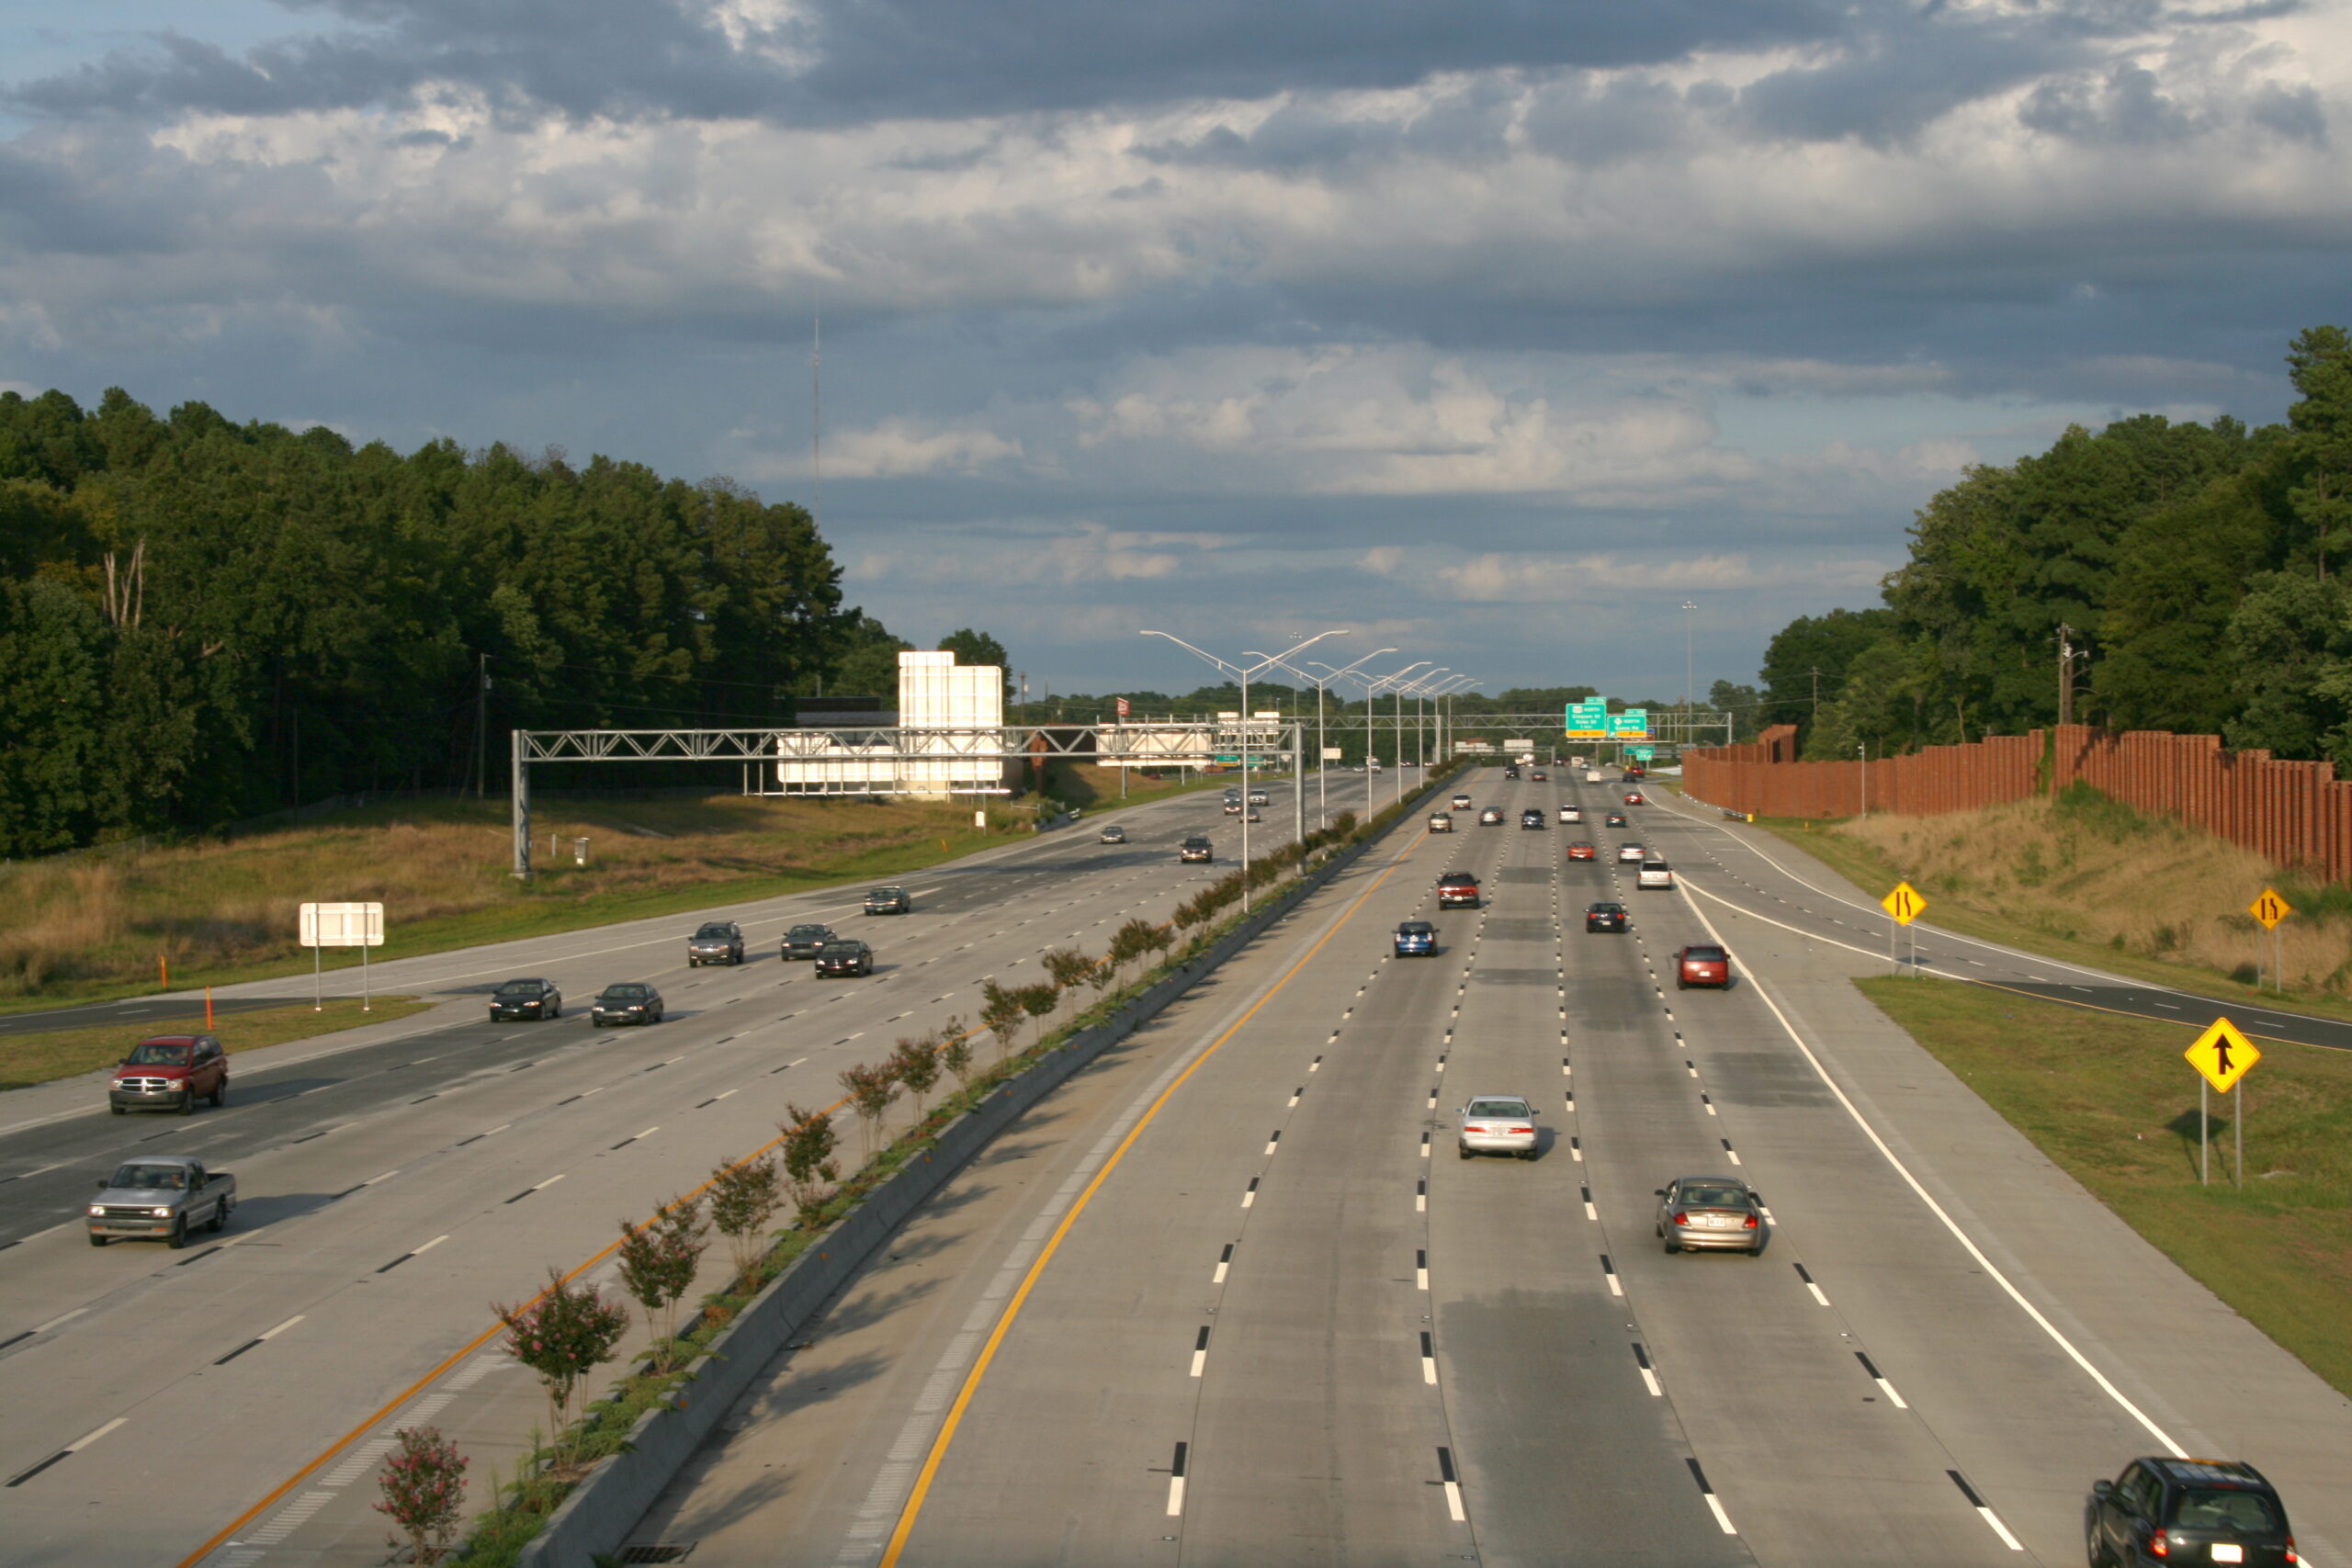 Audit finds North Carolina transportation department strayed from spending guidance